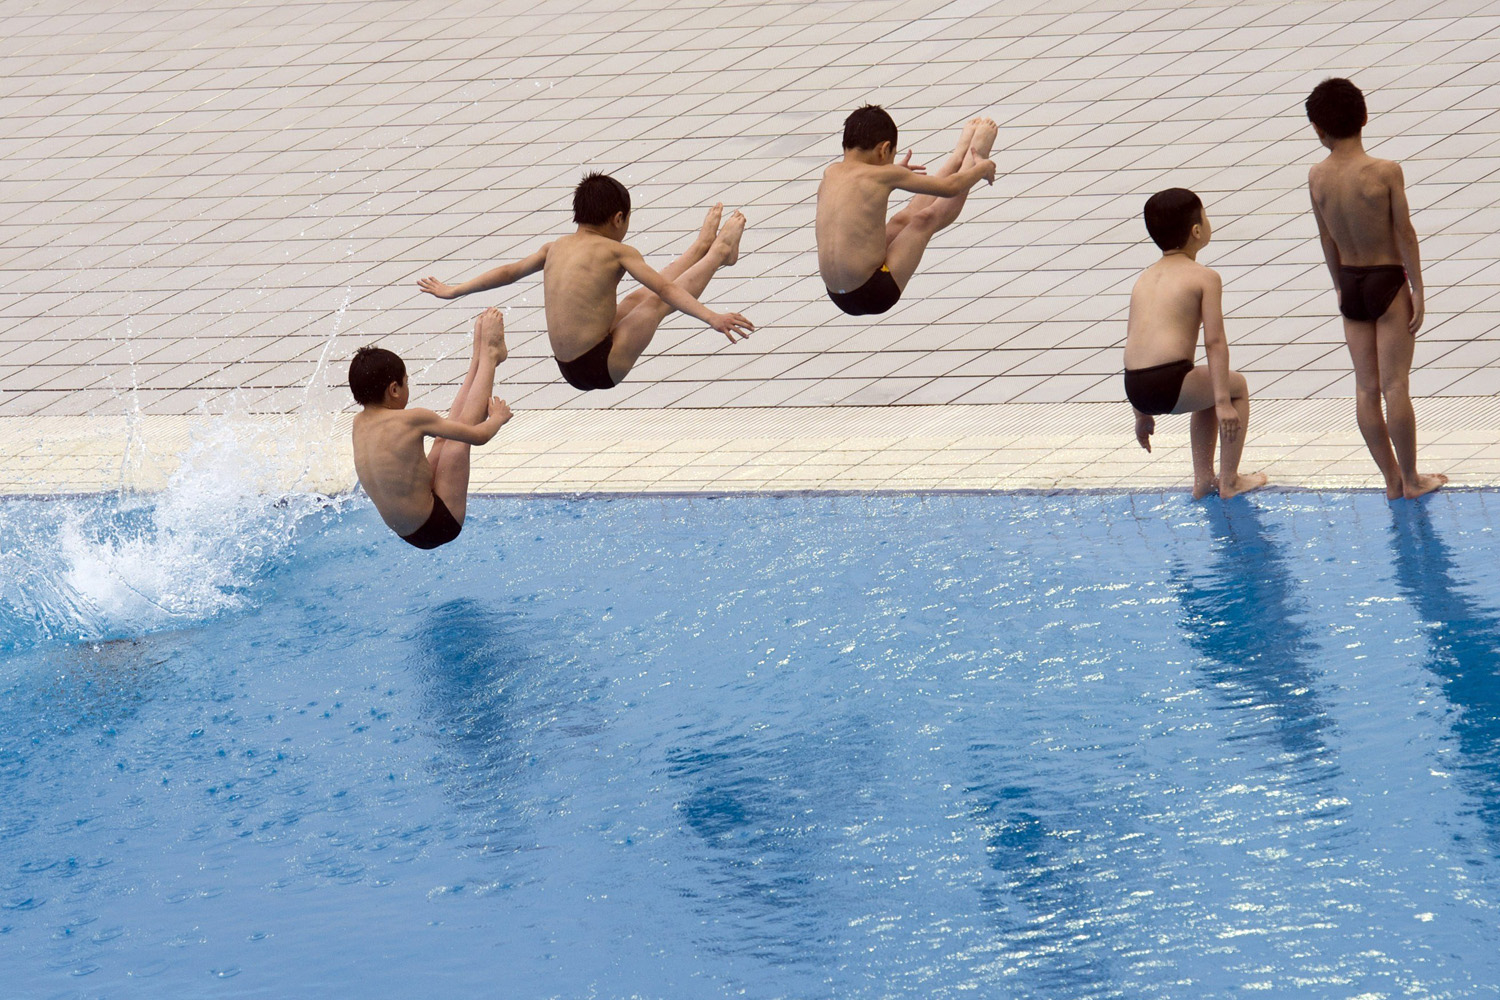 Children jump into the water during the opening ceremony of the 19th FINA Diving World Cup at the Oriental Sports Center in Shanghai on July 15, 2014.